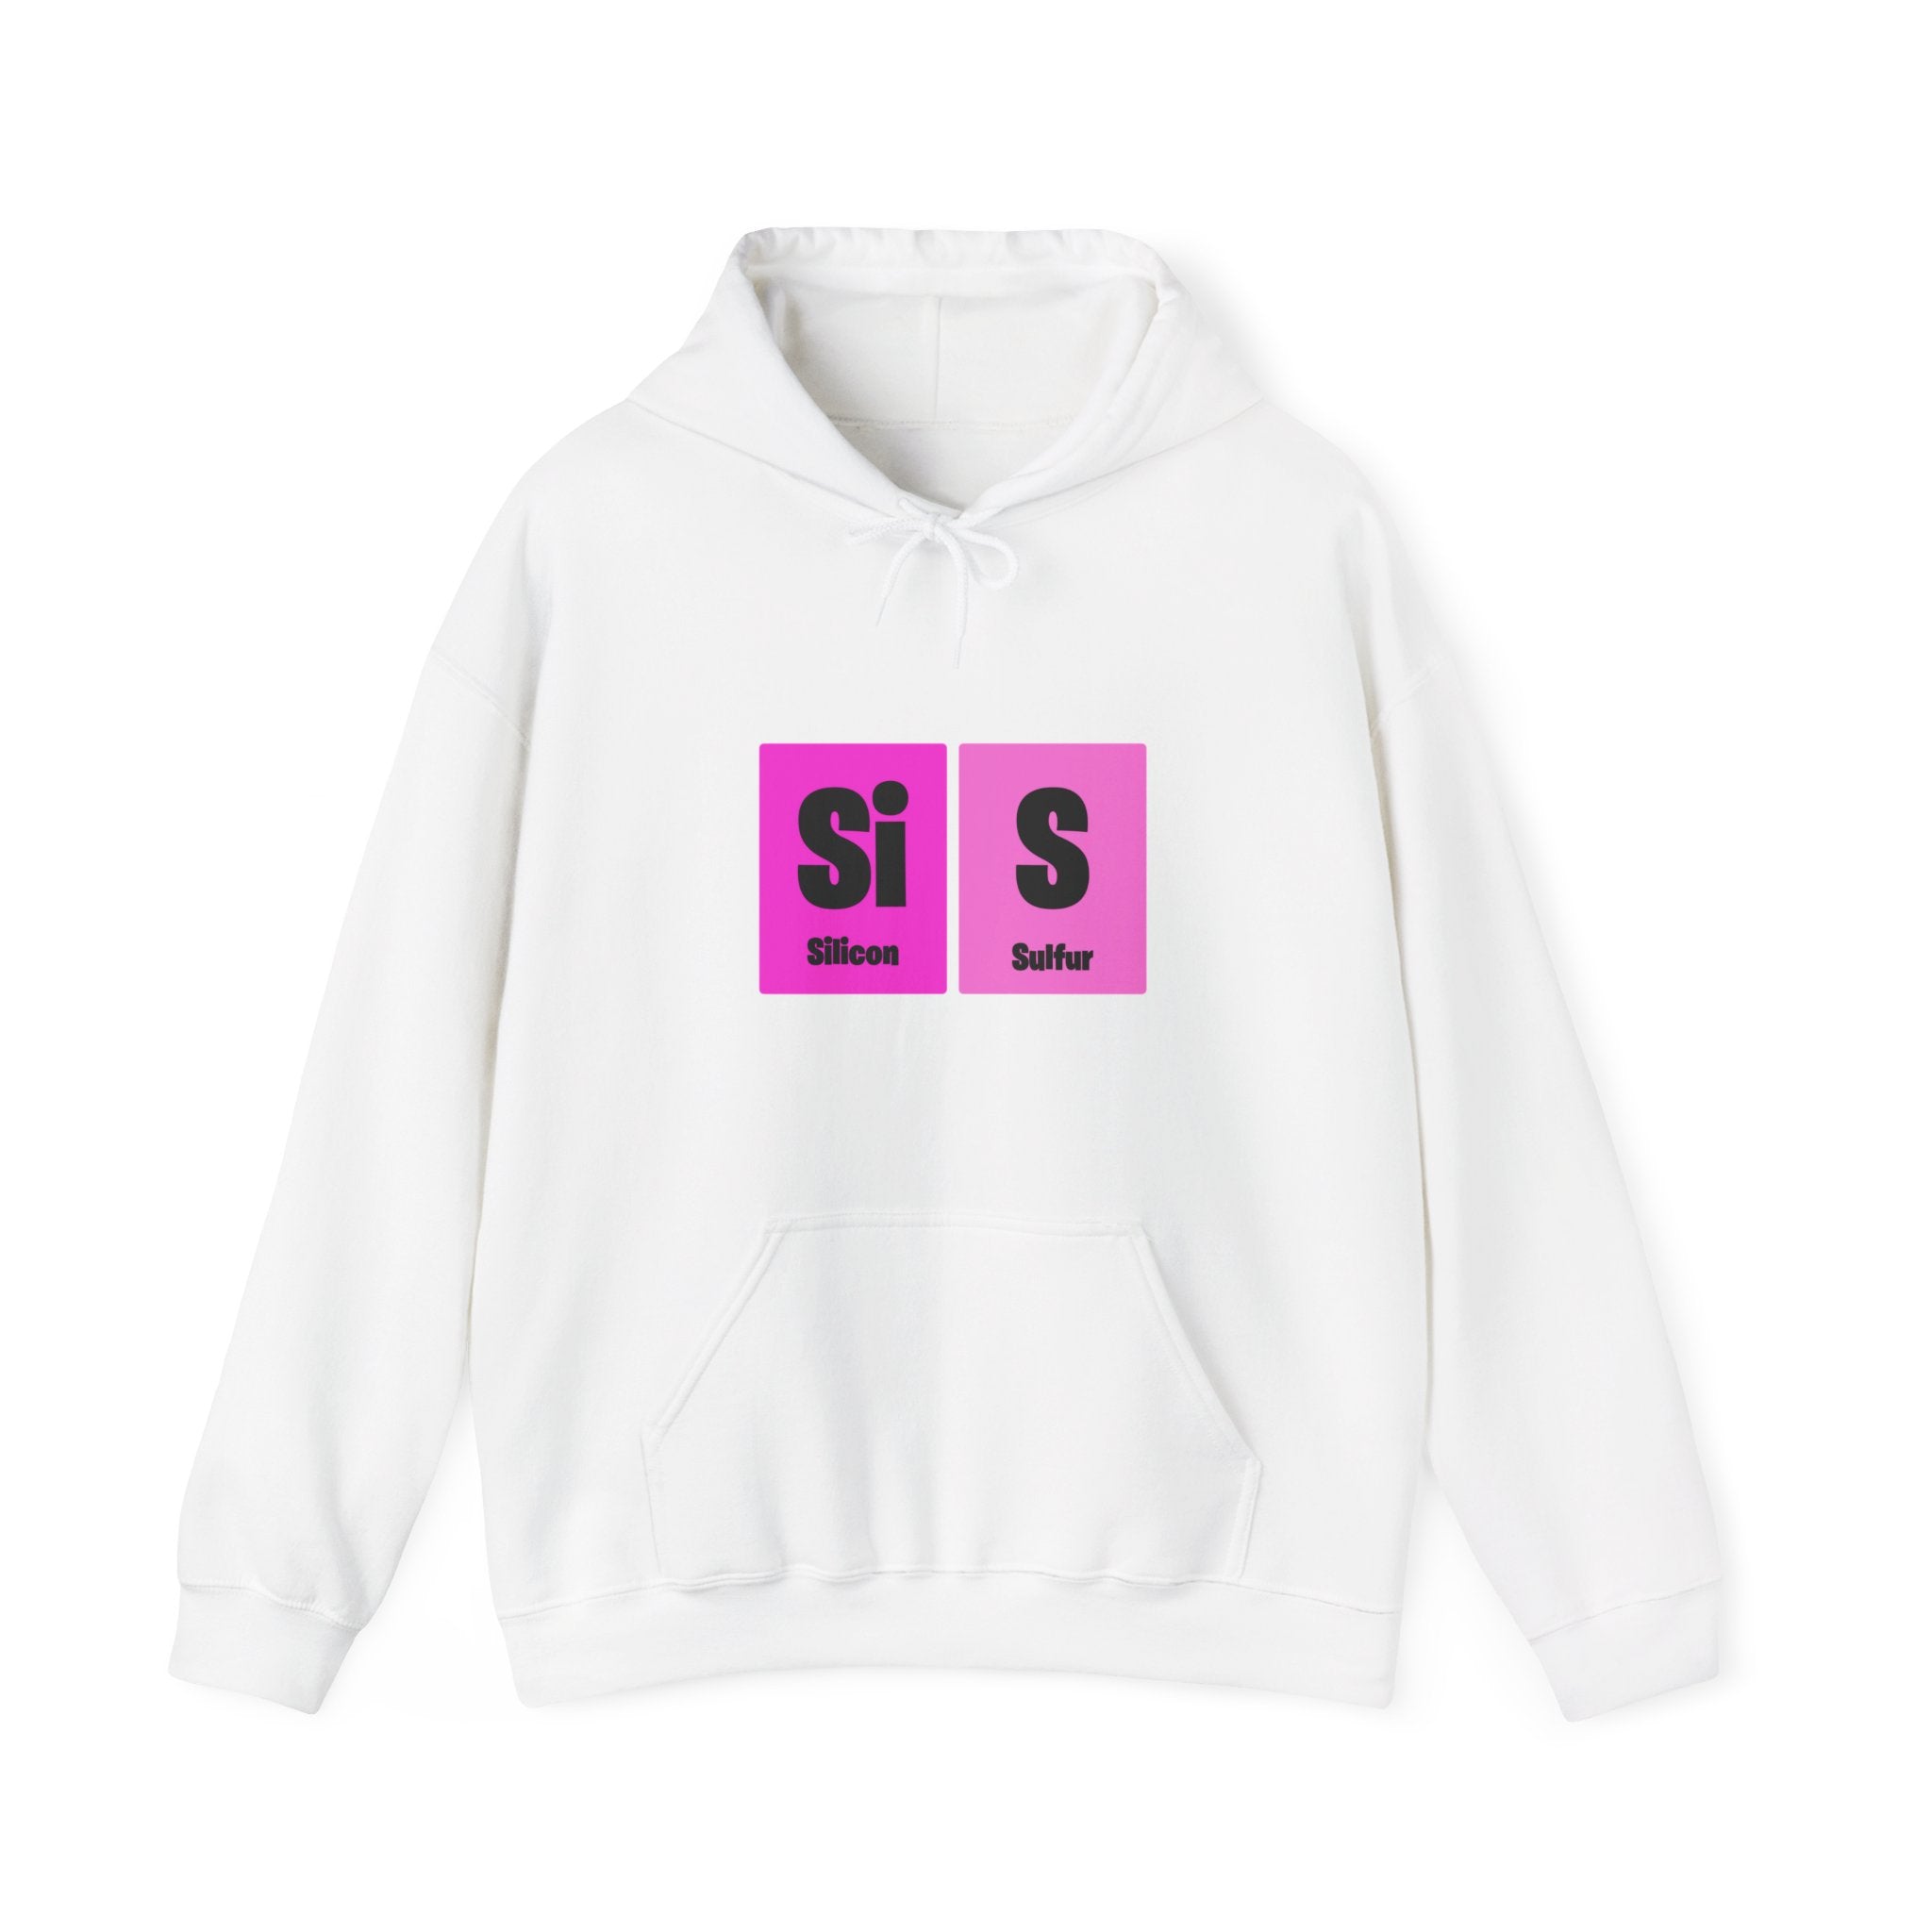 Stylish white Si-S Light Pendant - Hooded Sweatshirt featuring pink periodic table squares for Silicon (Si) and Sulfur (S) printed on the front, resembling a Si-S pendant.